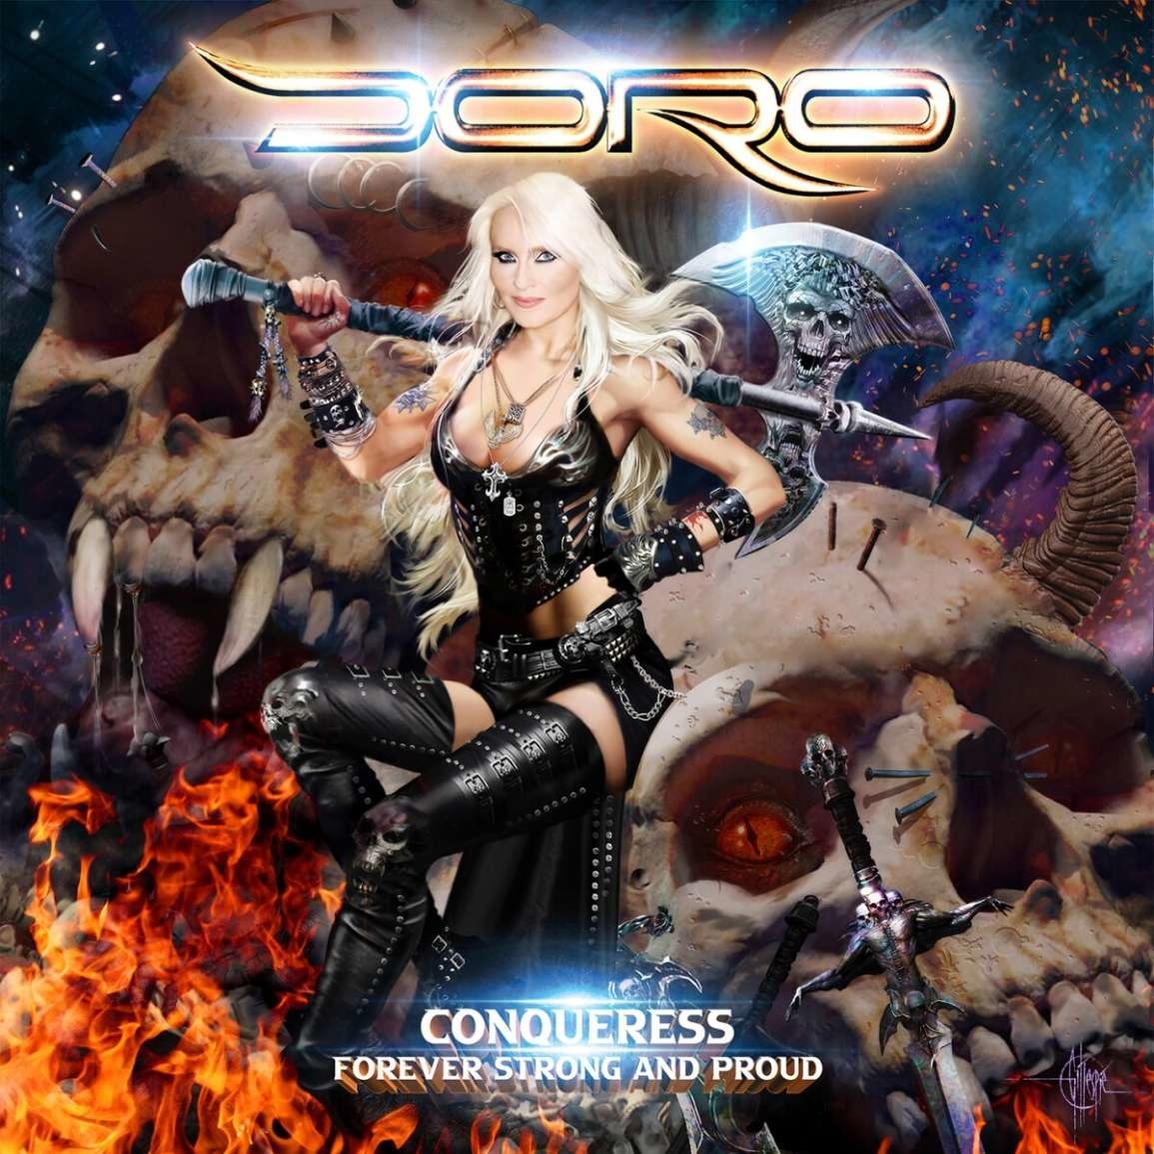 Strong Conqueress (Vinyl) and Proud - Forever - Doro -